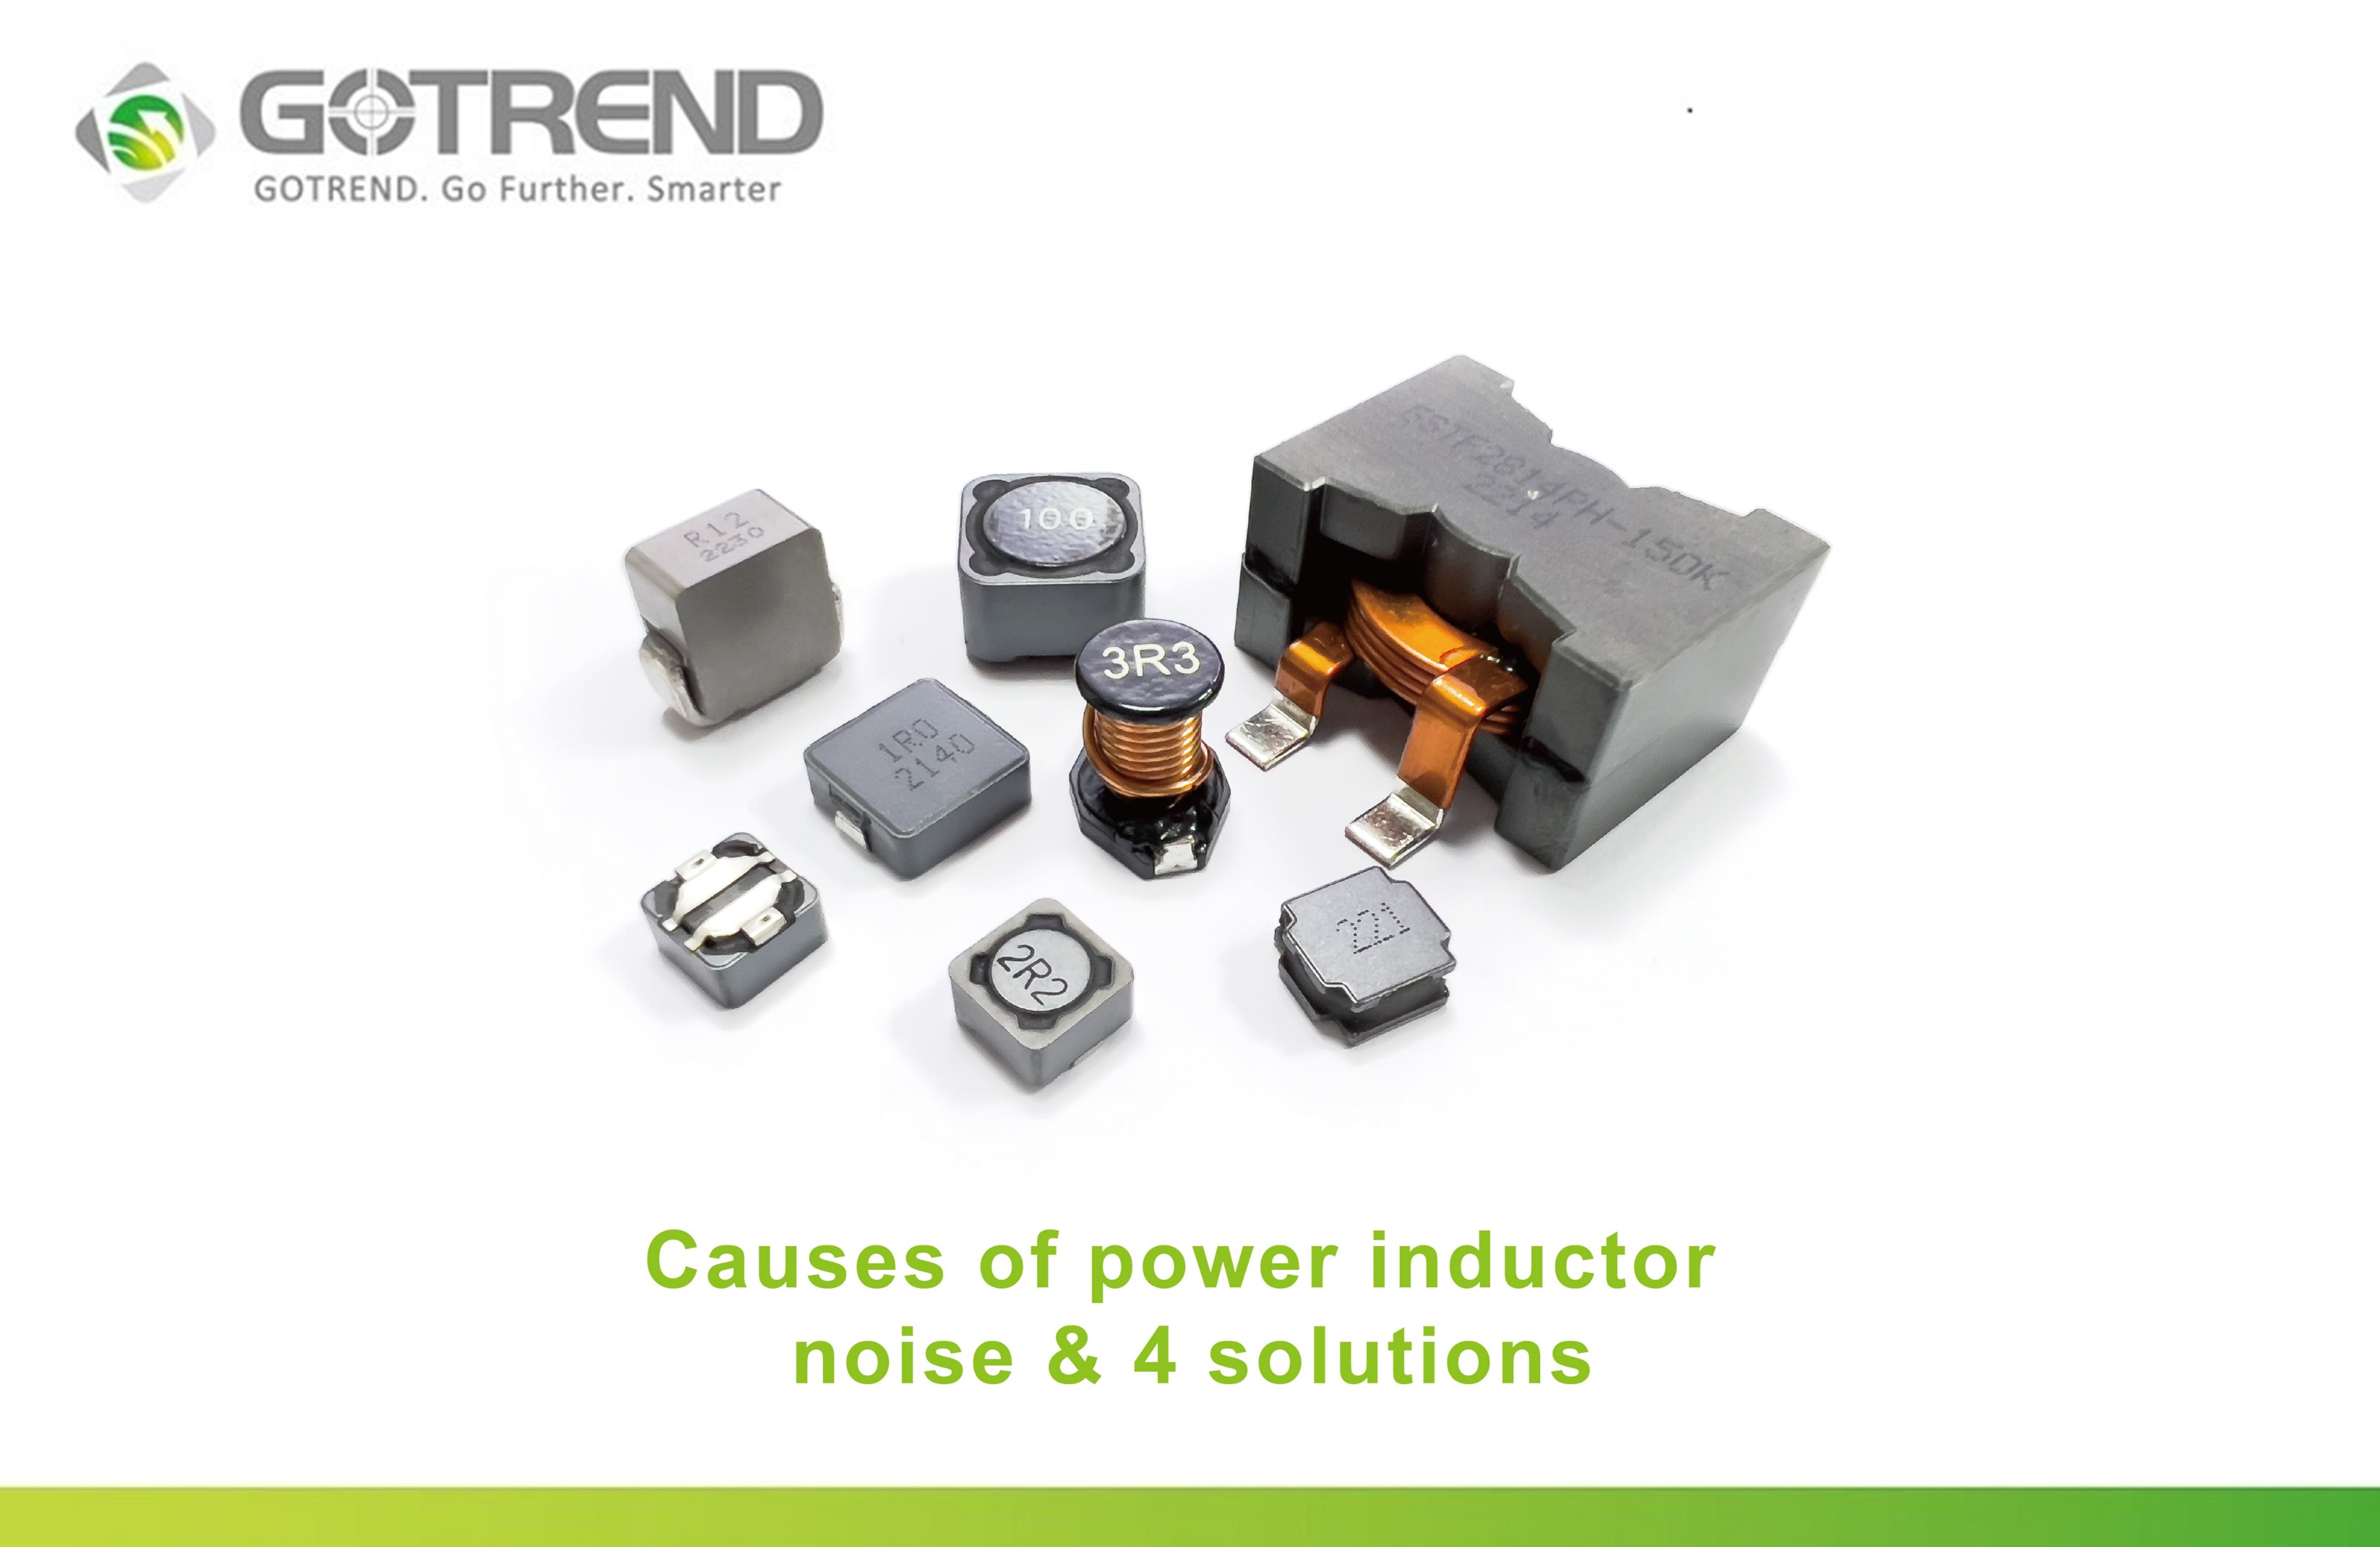 GOTREND-article-Causes of power inductor noise & 4 solutions